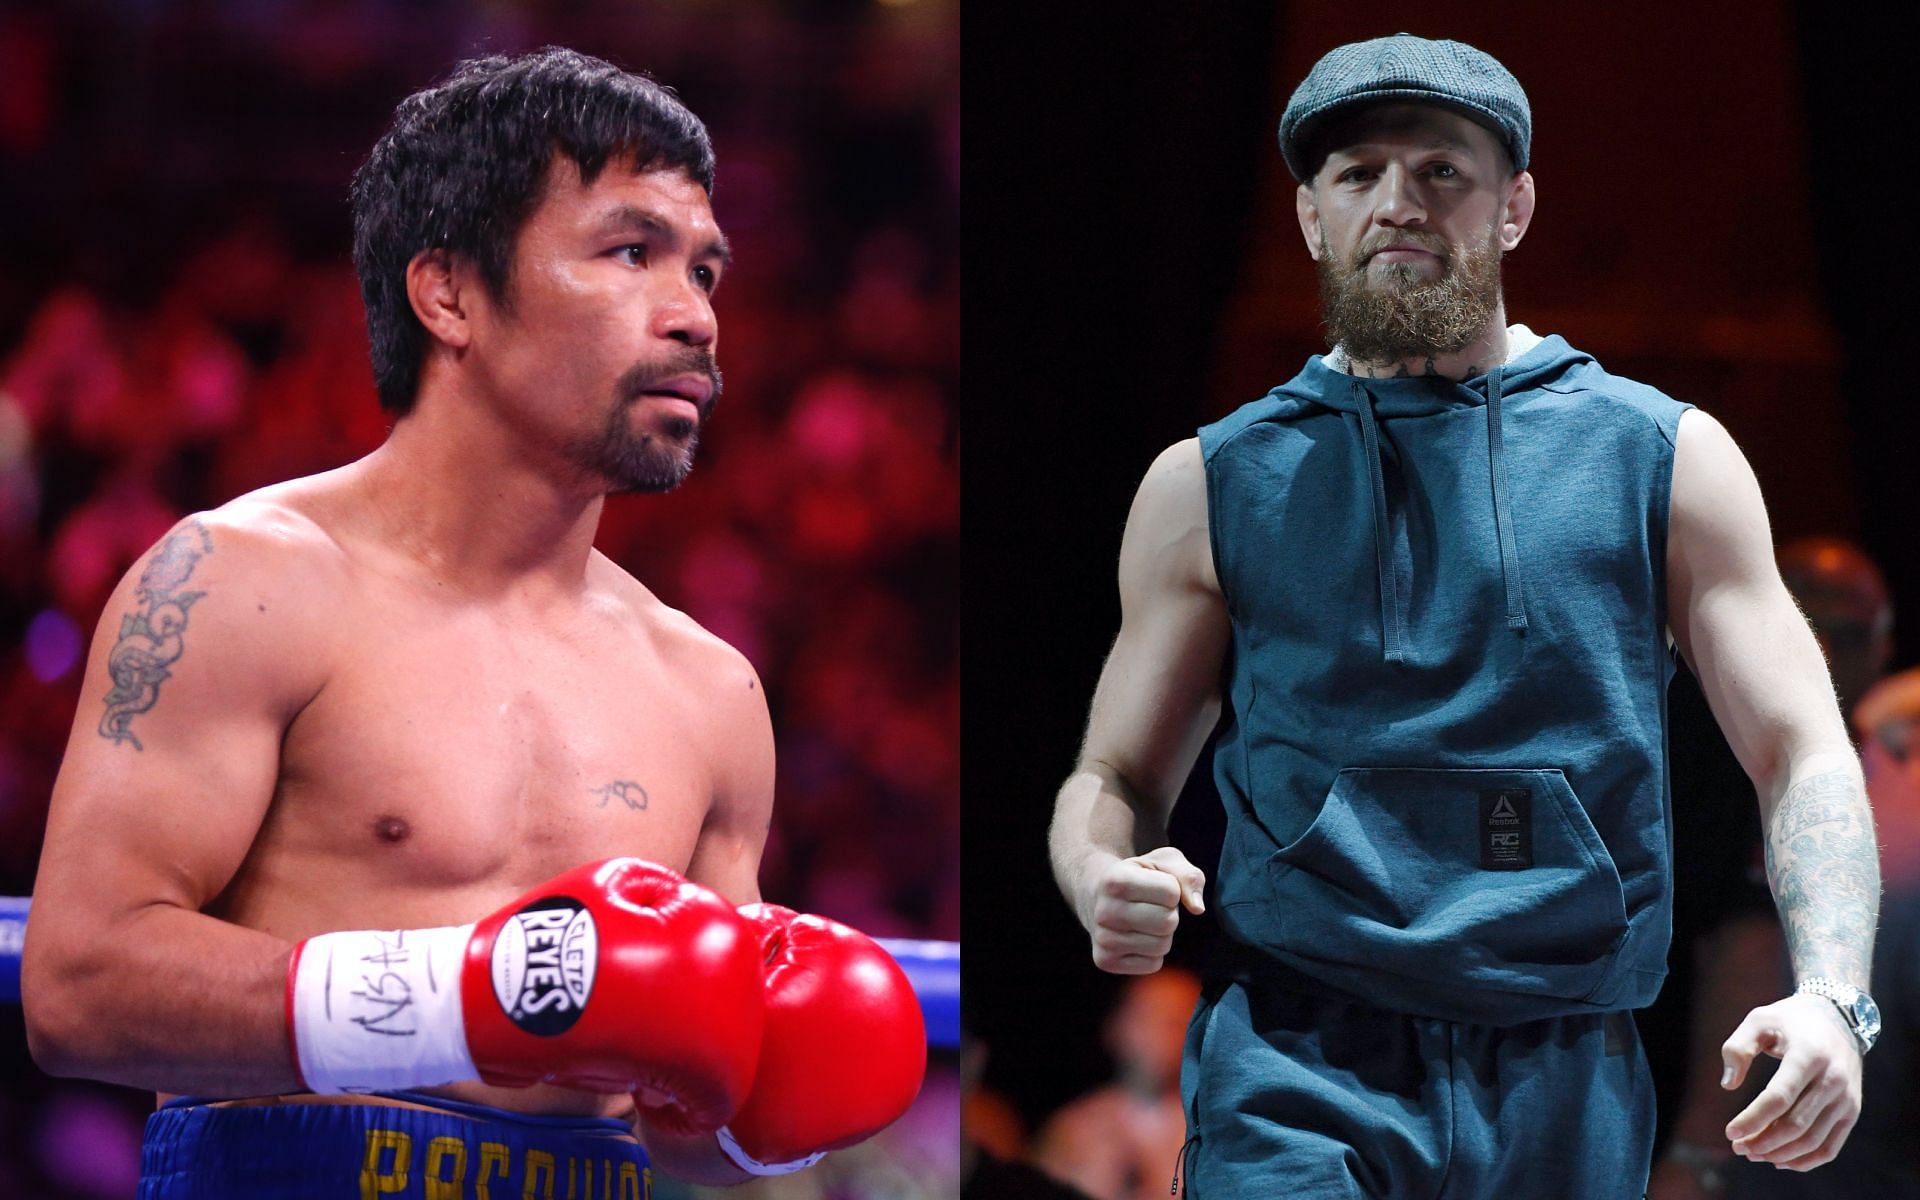 Manny Pacquiao and Conor McGregor [image credits: Getty Images] 